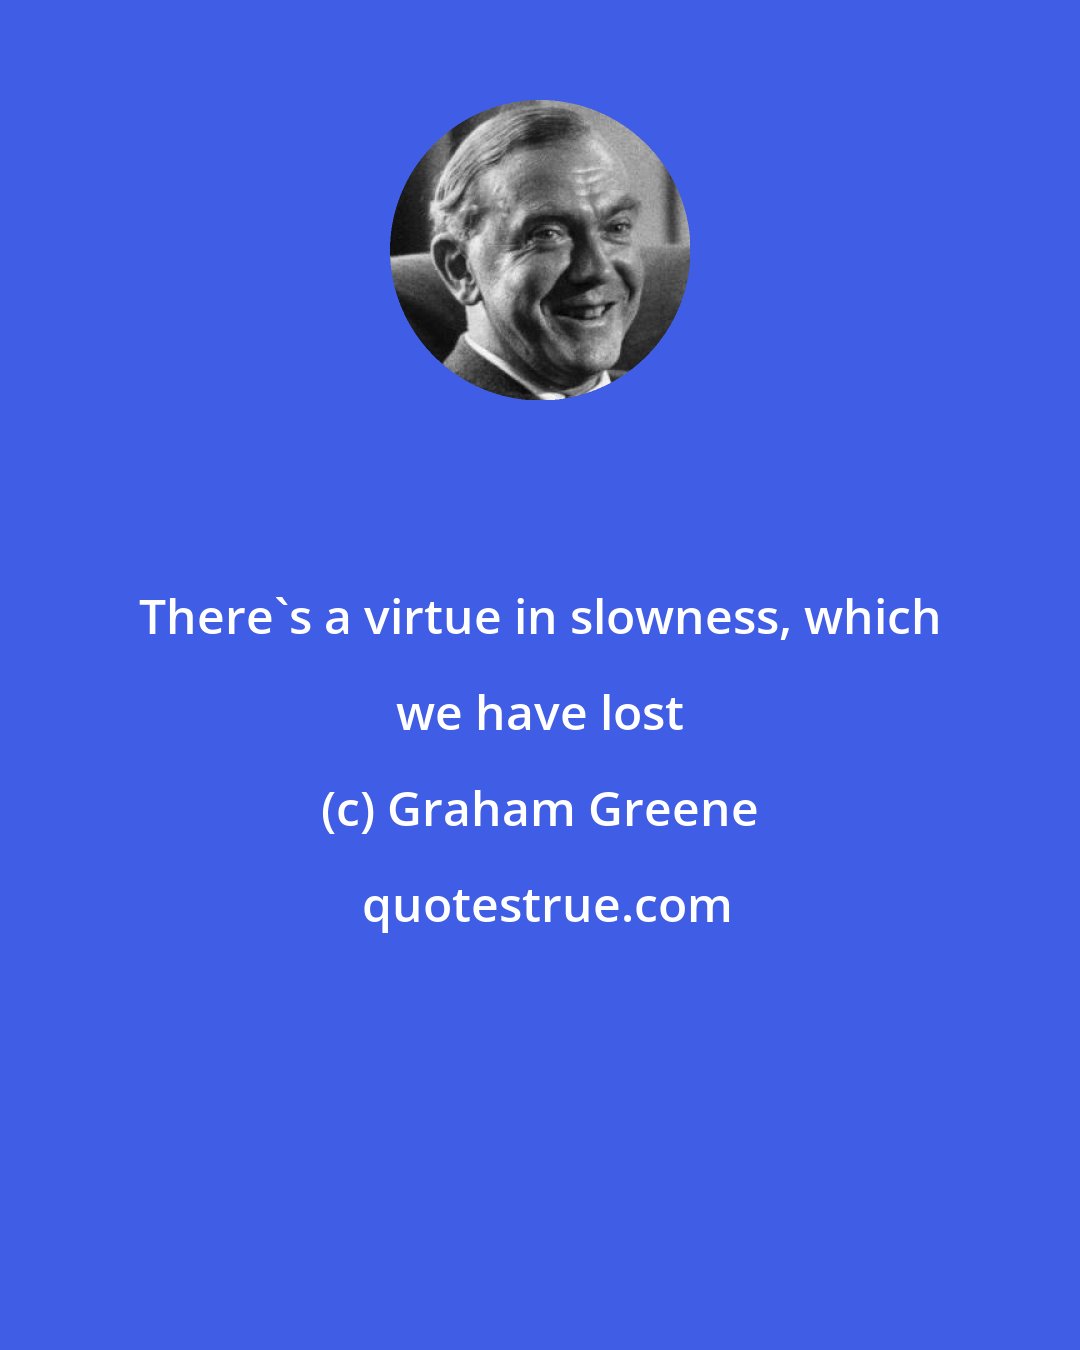 Graham Greene: There's a virtue in slowness, which we have lost